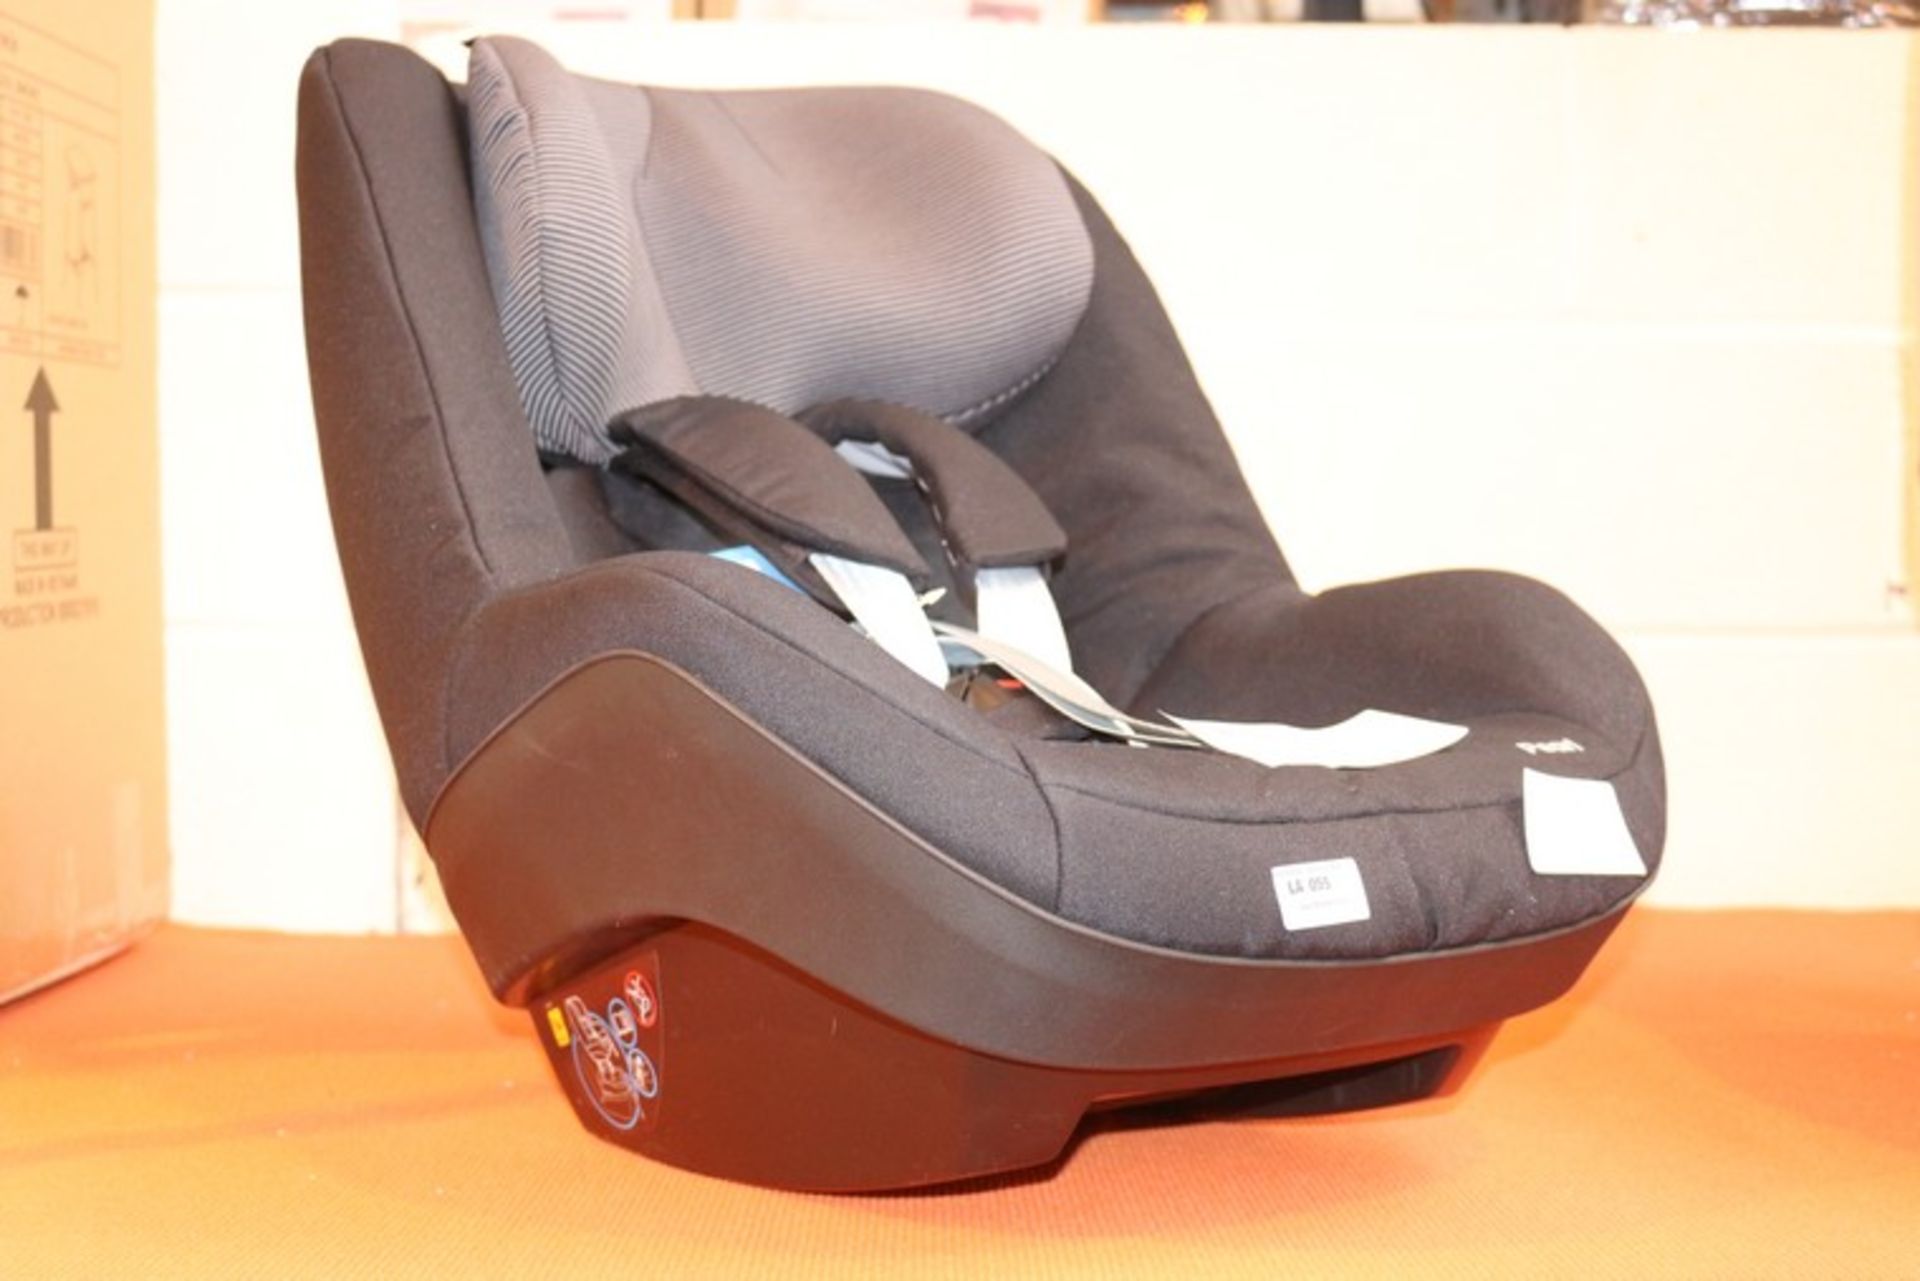 1 x MAXI COSY PEARL IN CAR CHILDRENS SAFETY SEAT RRP £170 (13.4.17) *PLEASE NOTE THAT THE BID